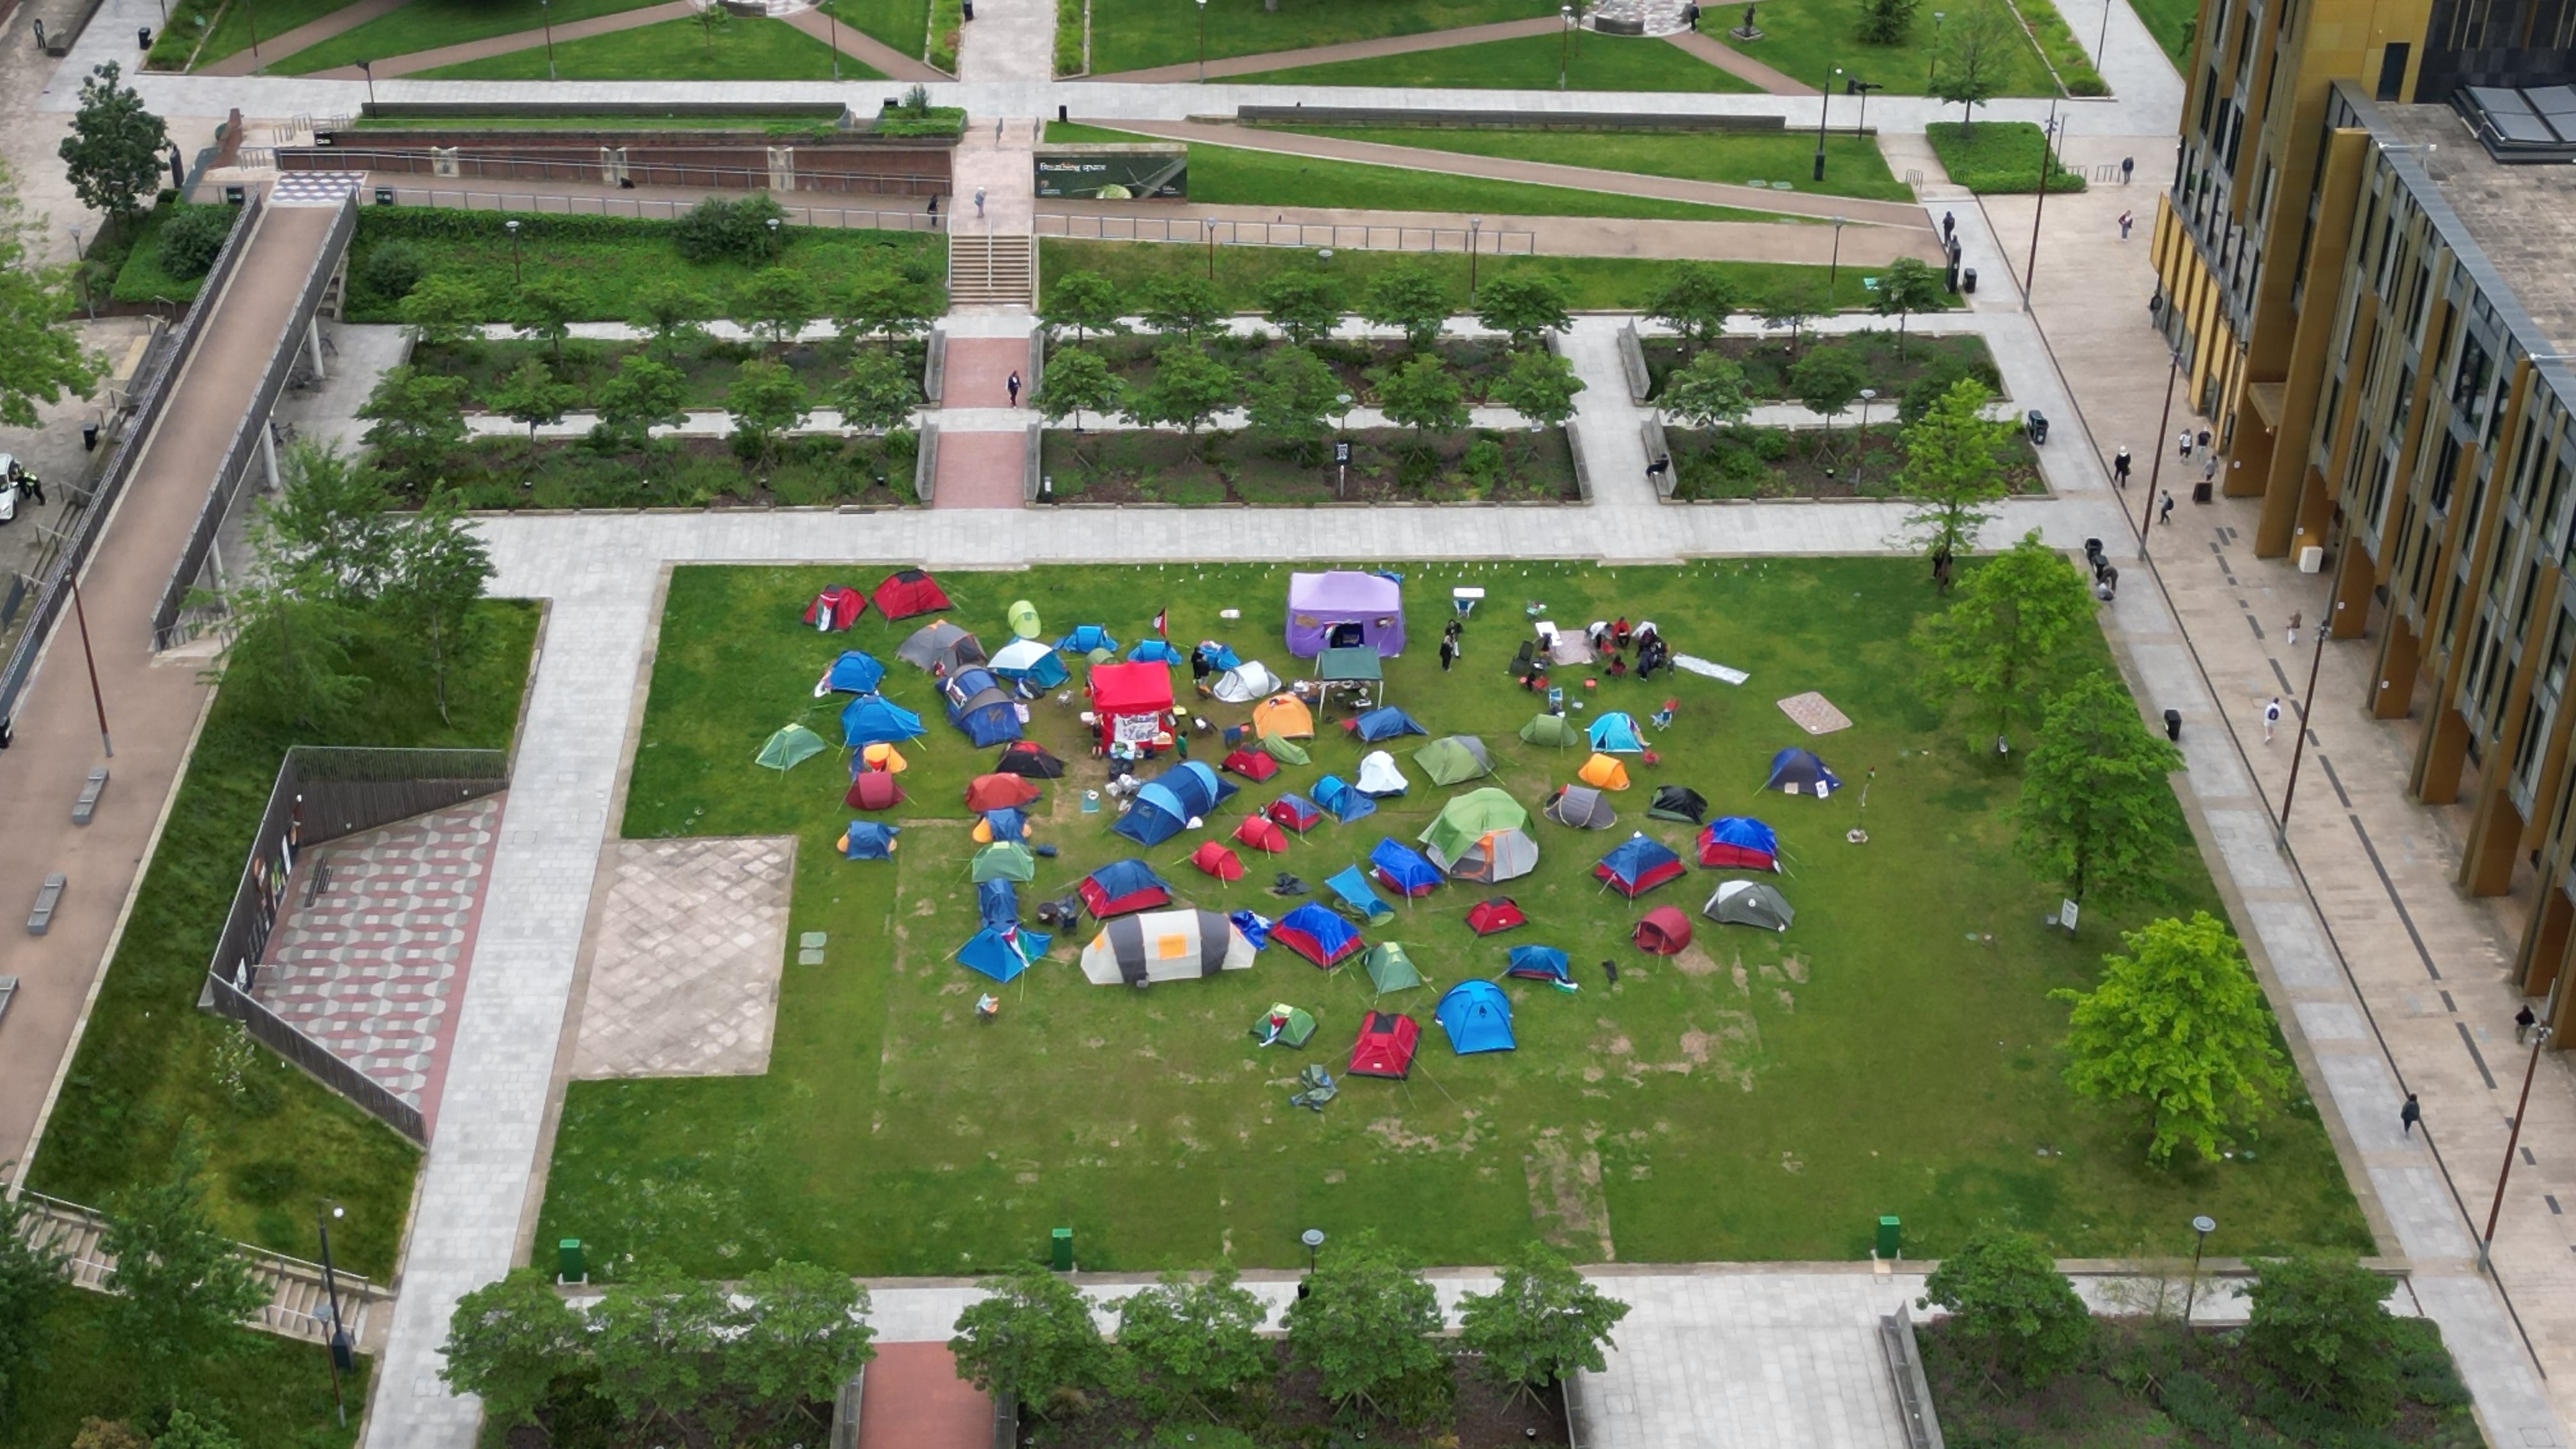 Drone footage of the Gaza war protest encampment at the University of Birmingham in May